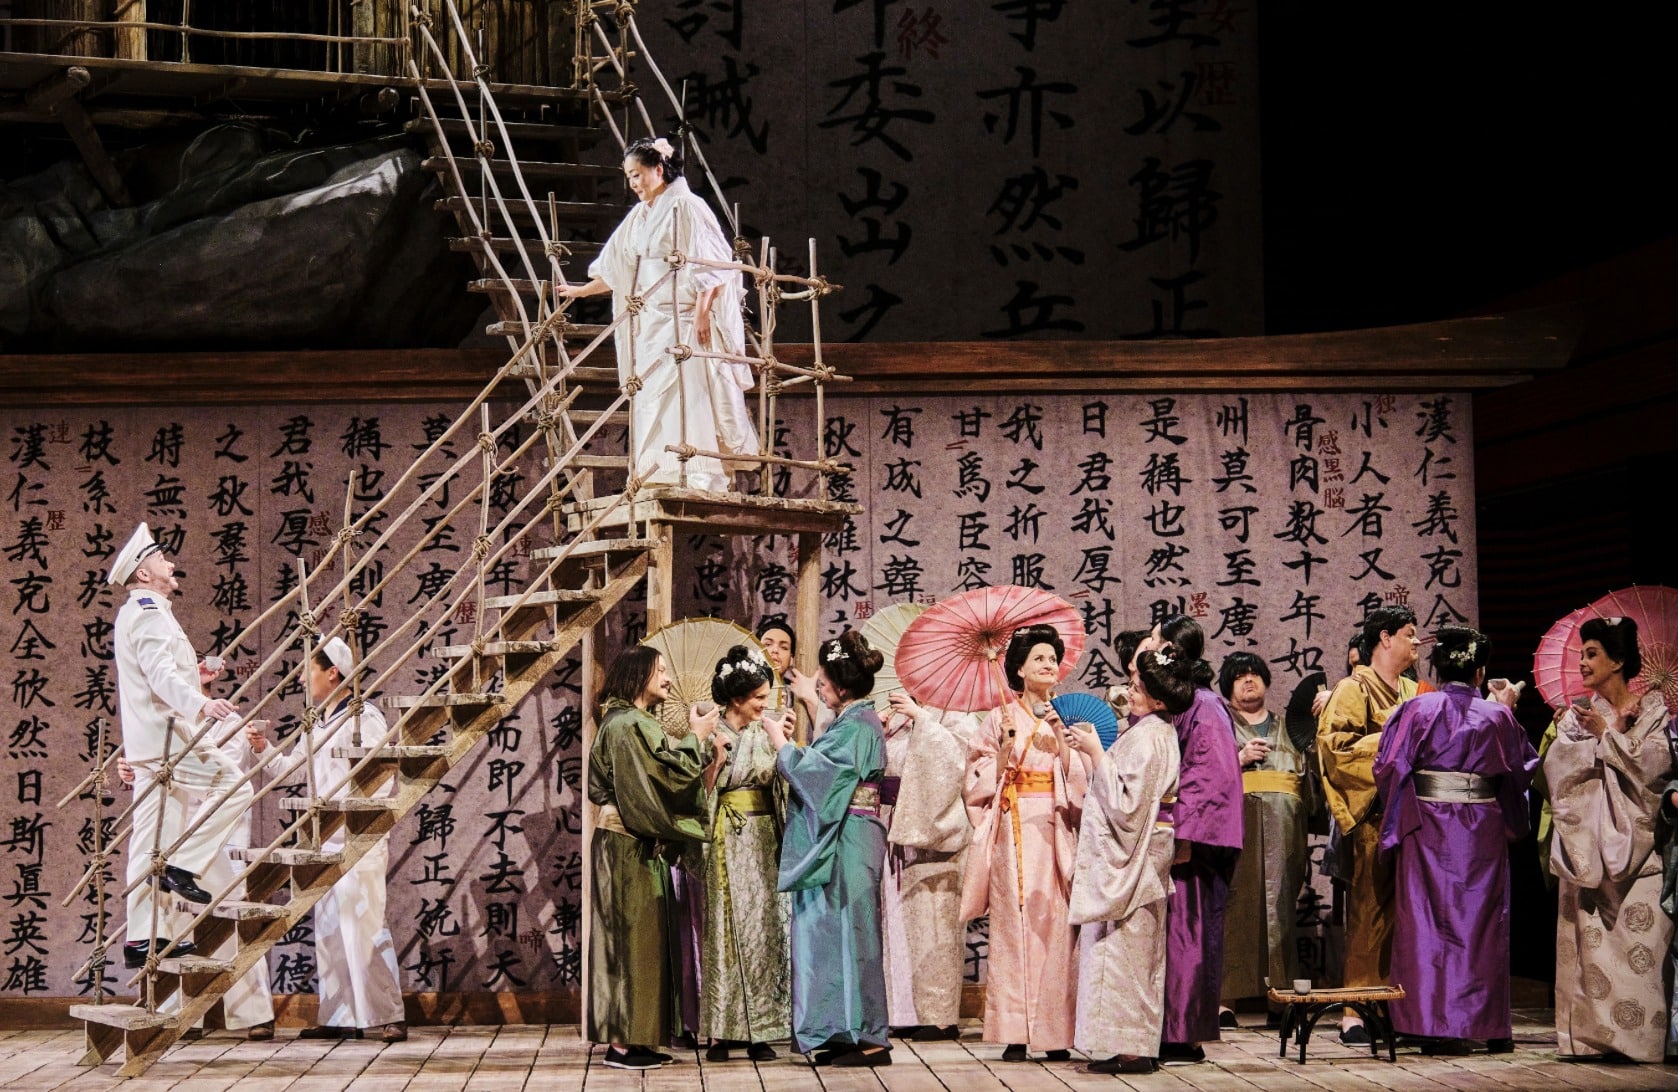 Icelandic Opera’s “Madama Butterfly” Reinforces Racist Stereotypes, Critics Say